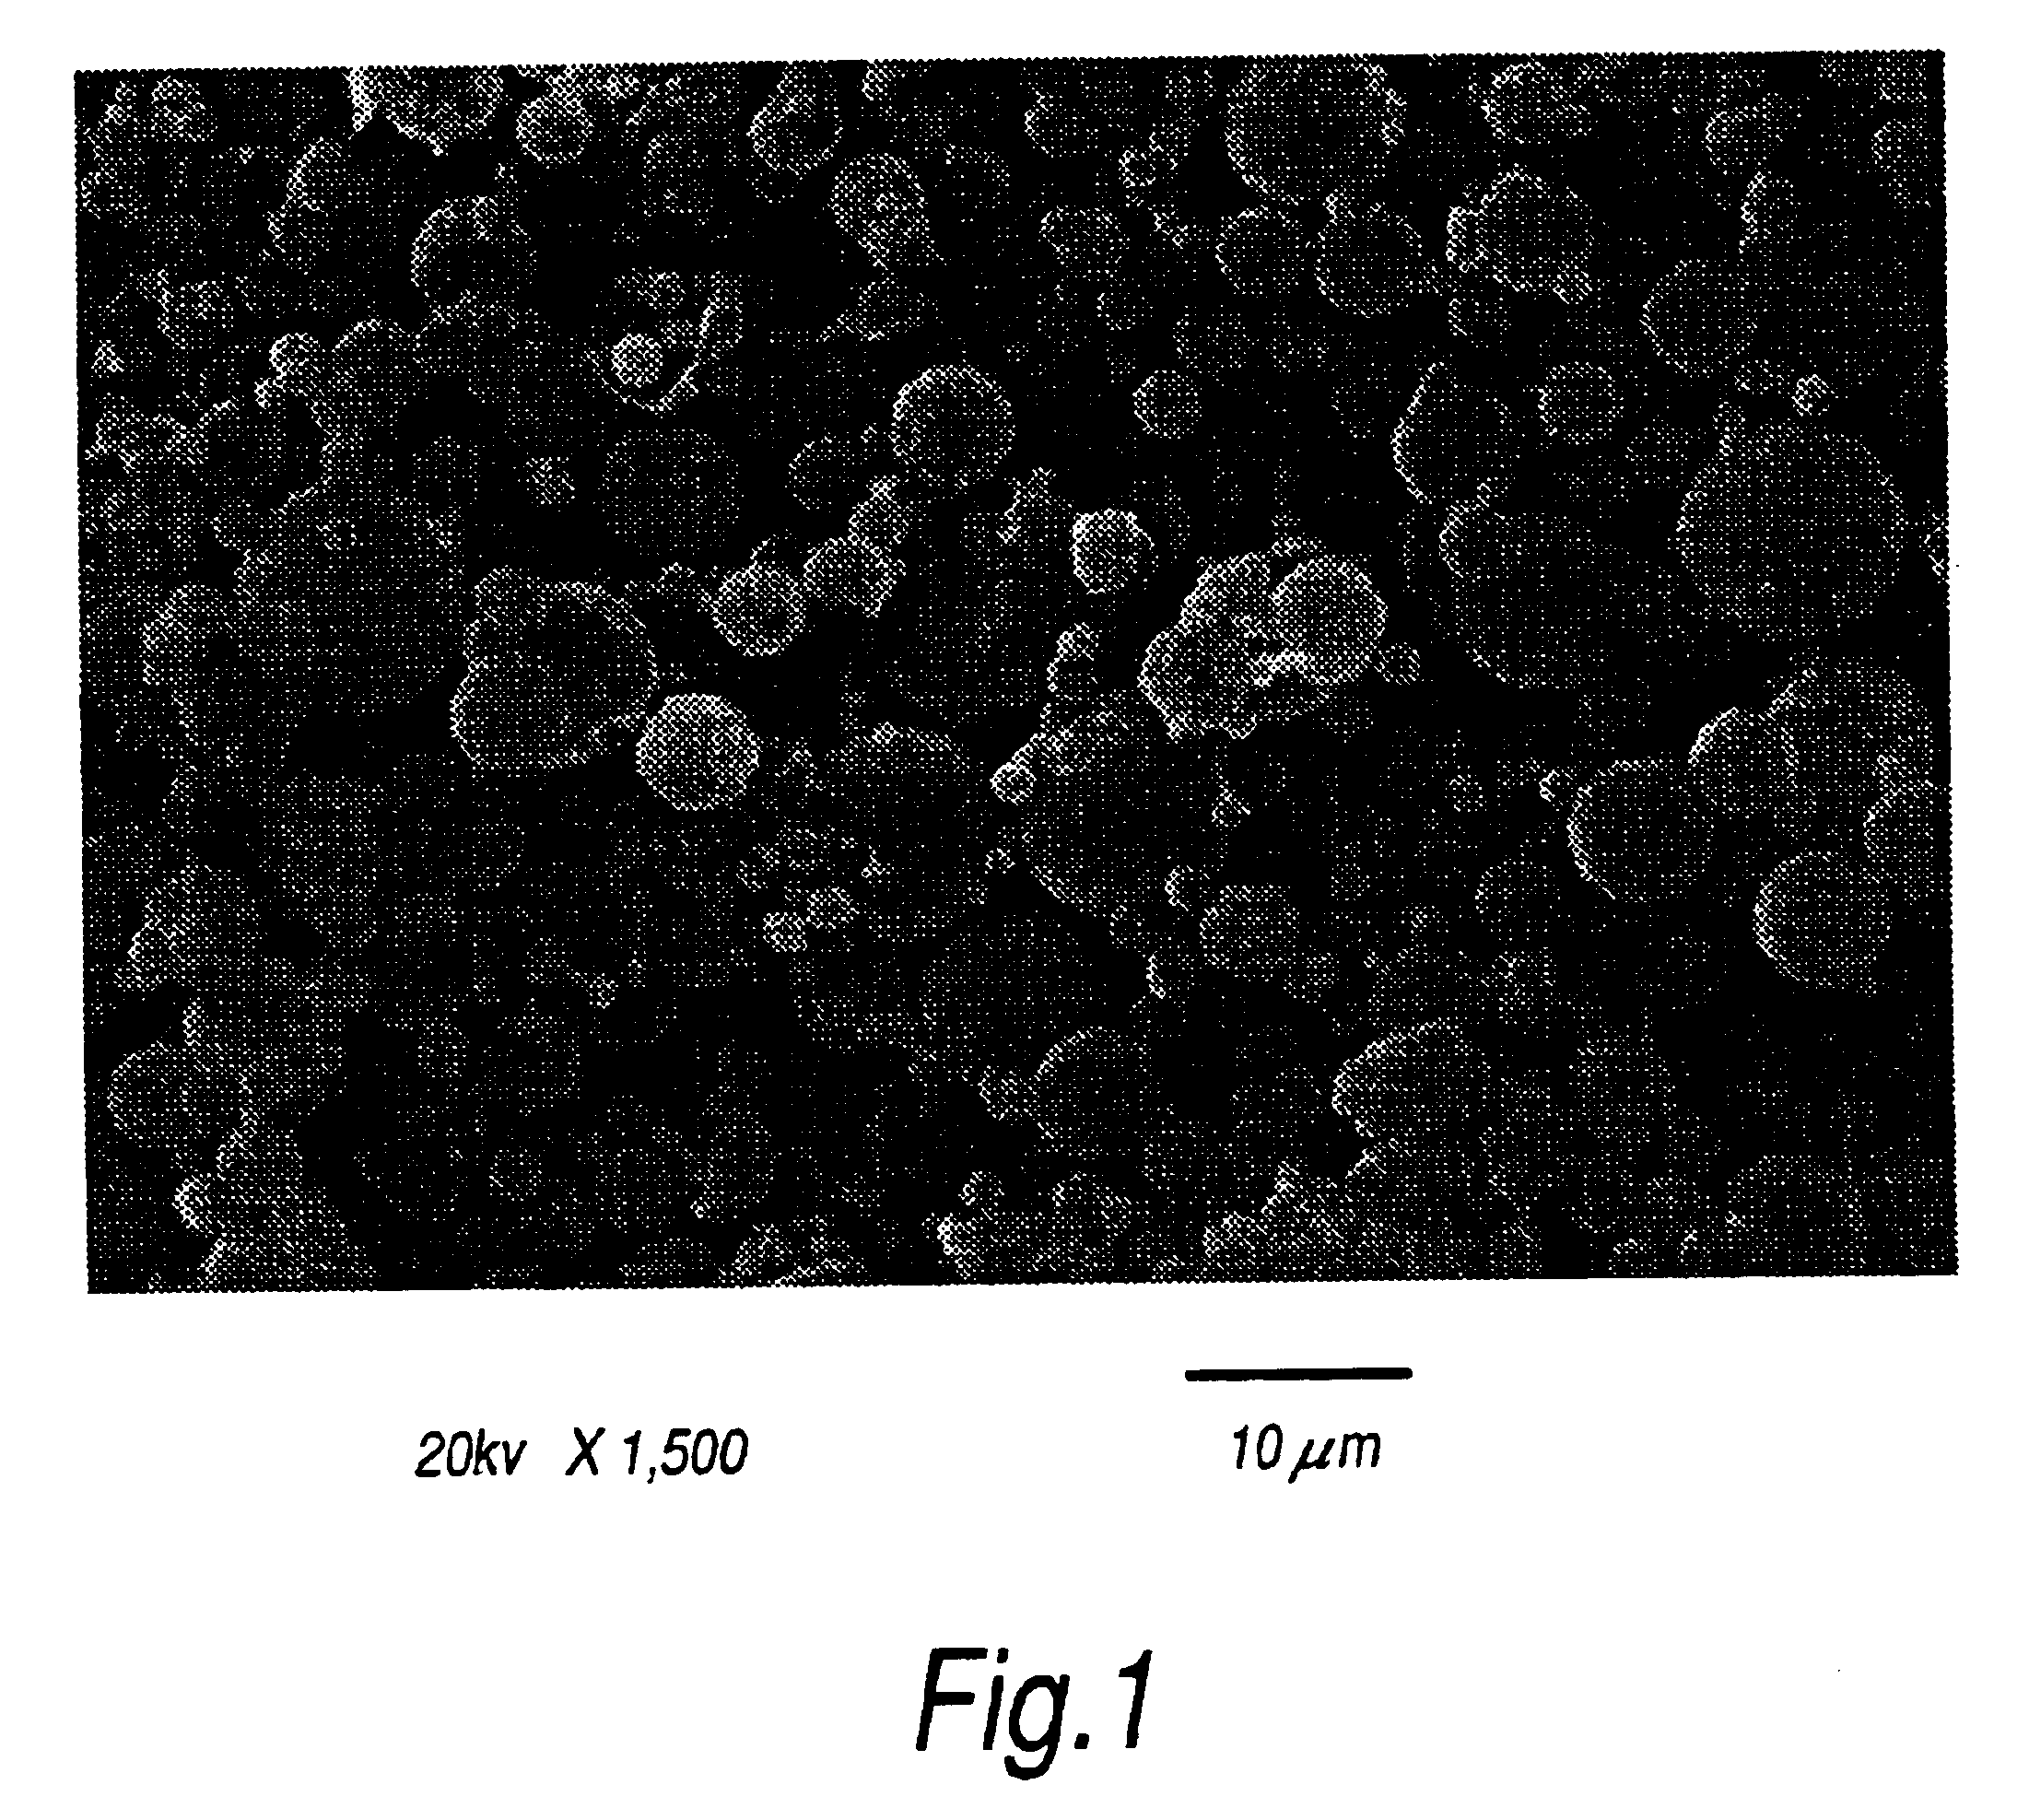 Antigen delivery system and method of production